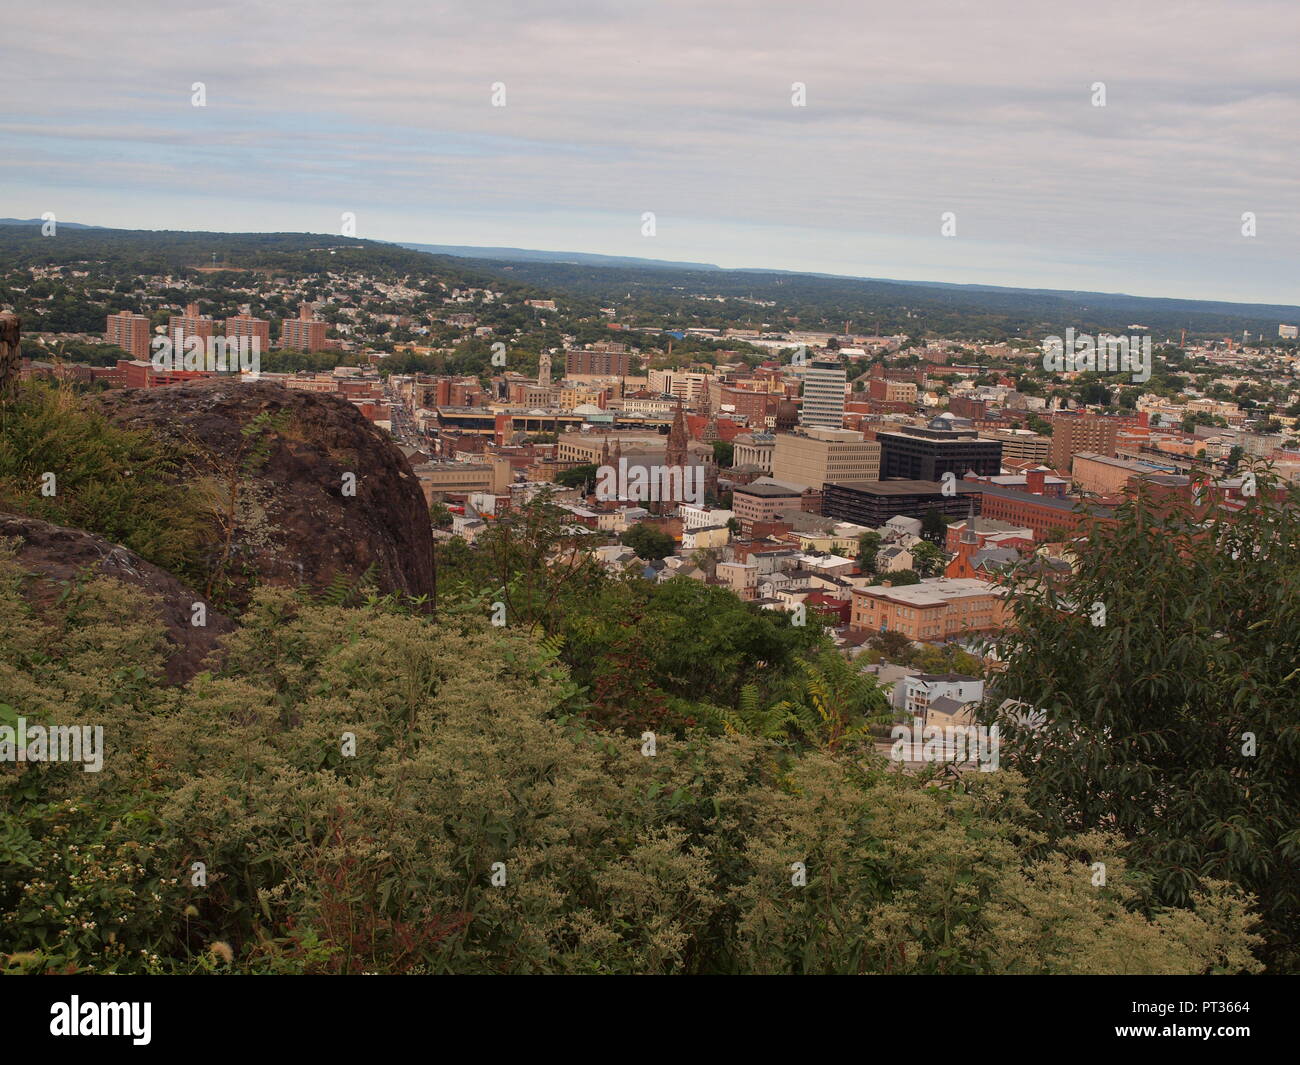 Paterson NJ from the Garrett Mountain reservation overlook in Passaic County, New Jersey. Stock Photo